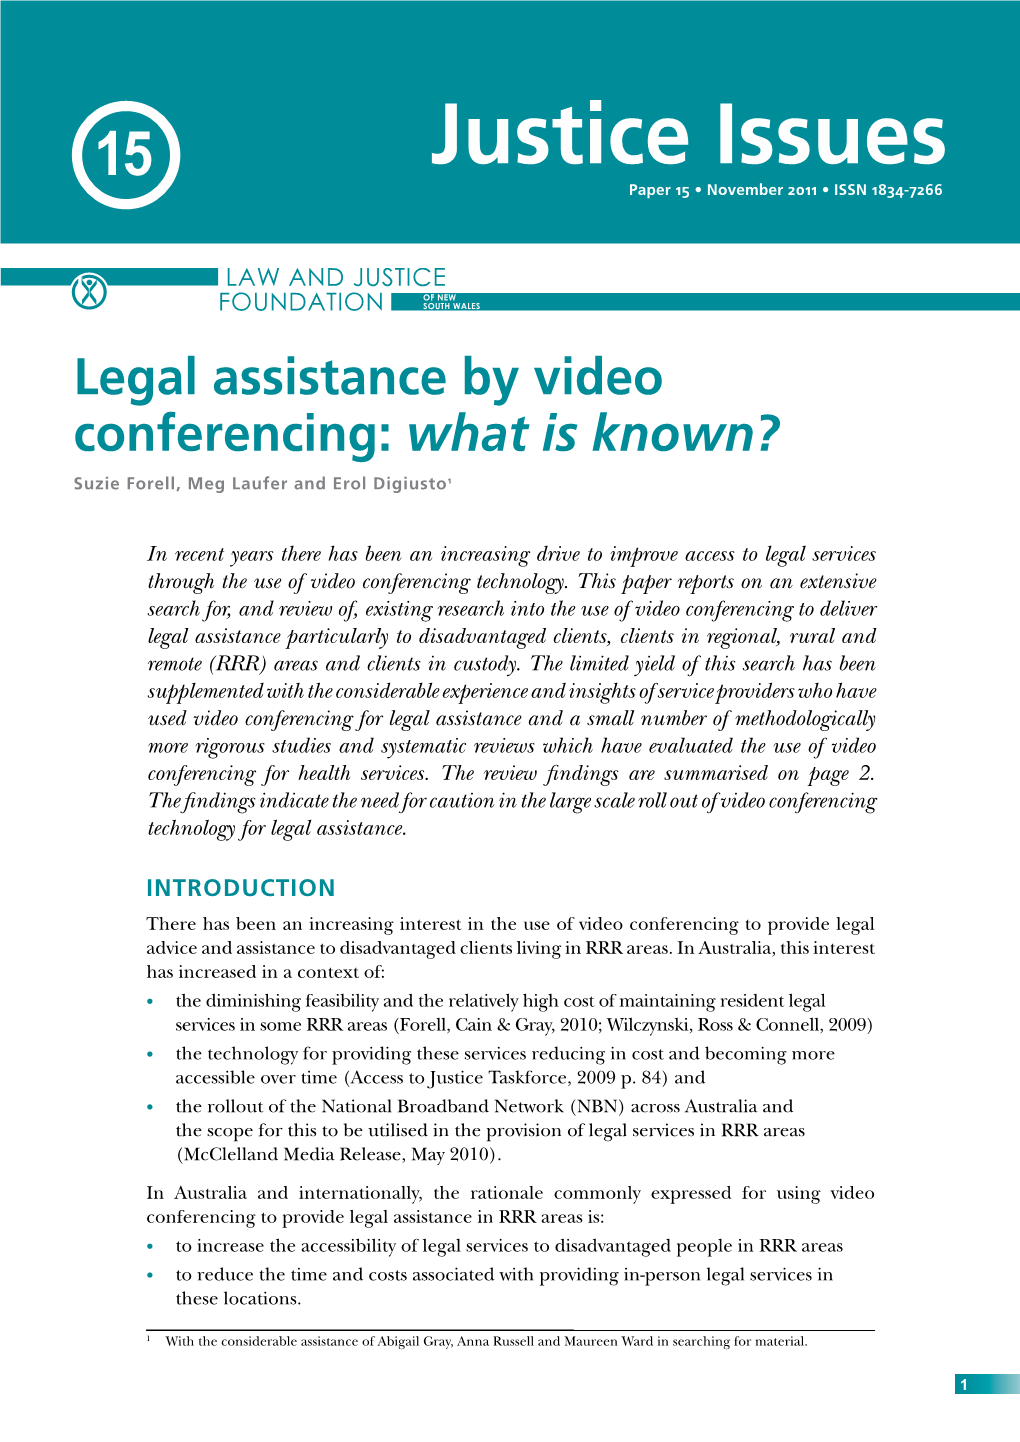 Legal Assistance by Video Conferencing: What Is Known? Suzie Forell, Meg Laufer and Erol Digiusto1